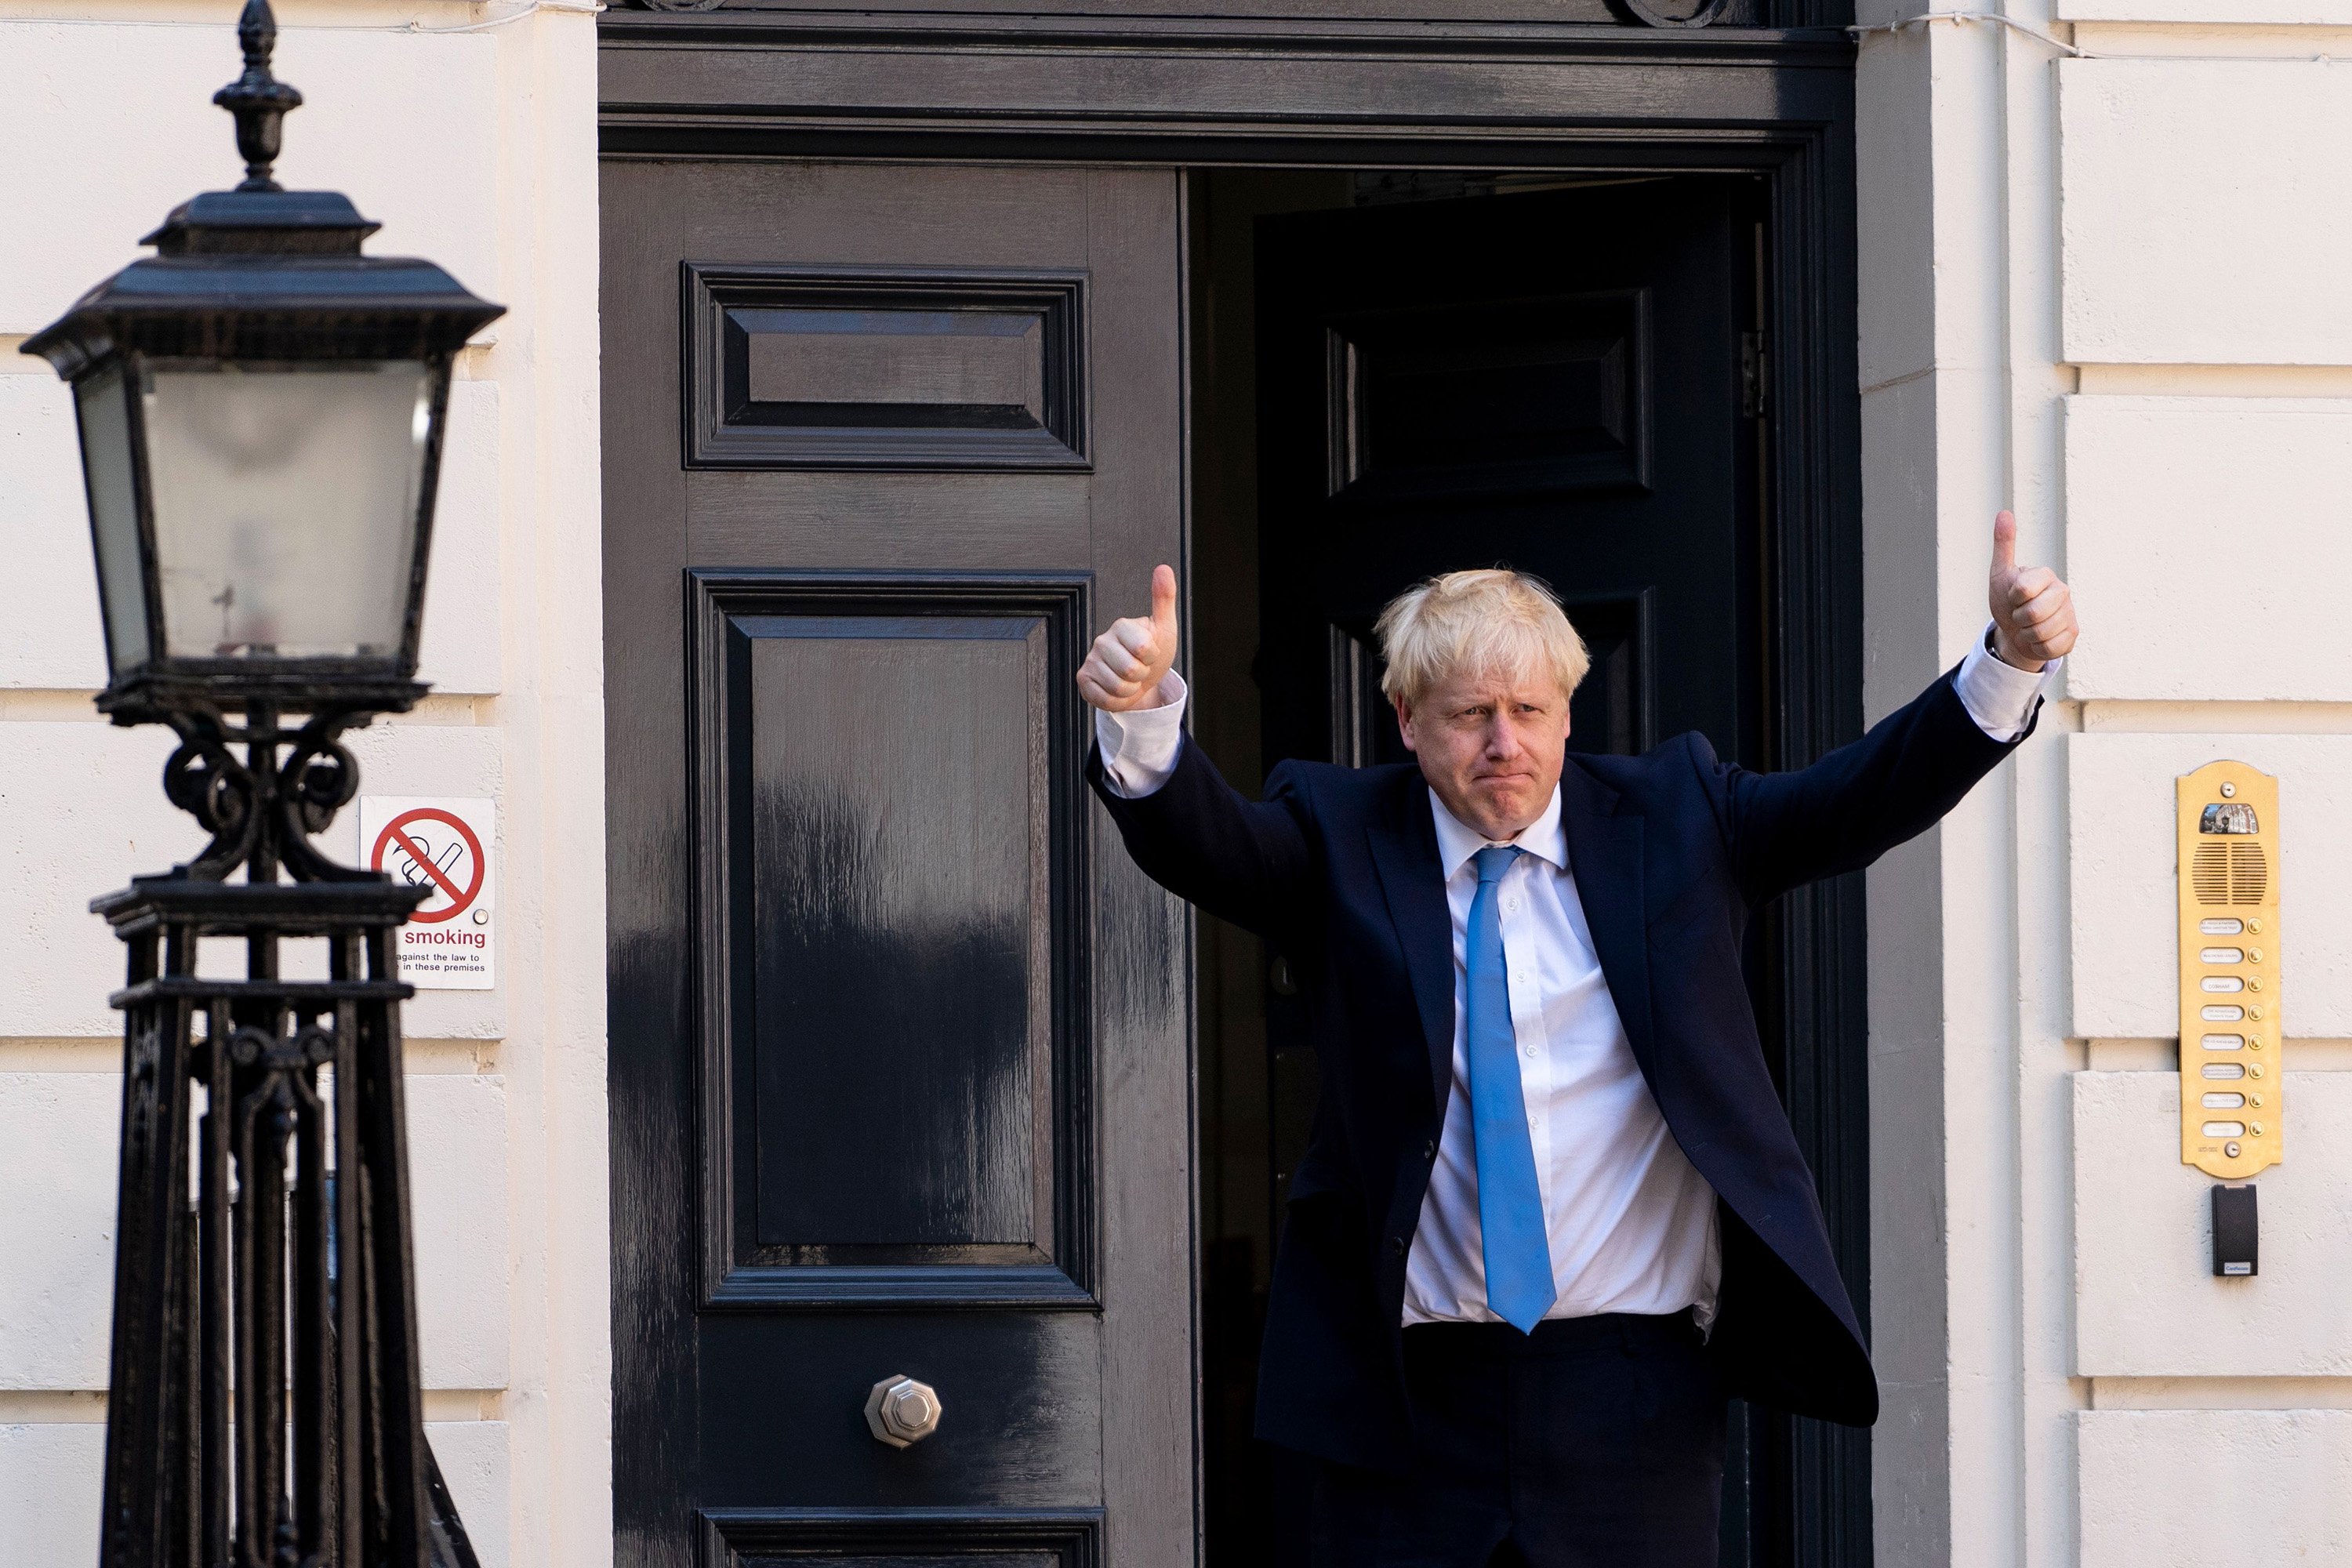 Johnson arrives at the Conservative party headquarters in London on July 23.